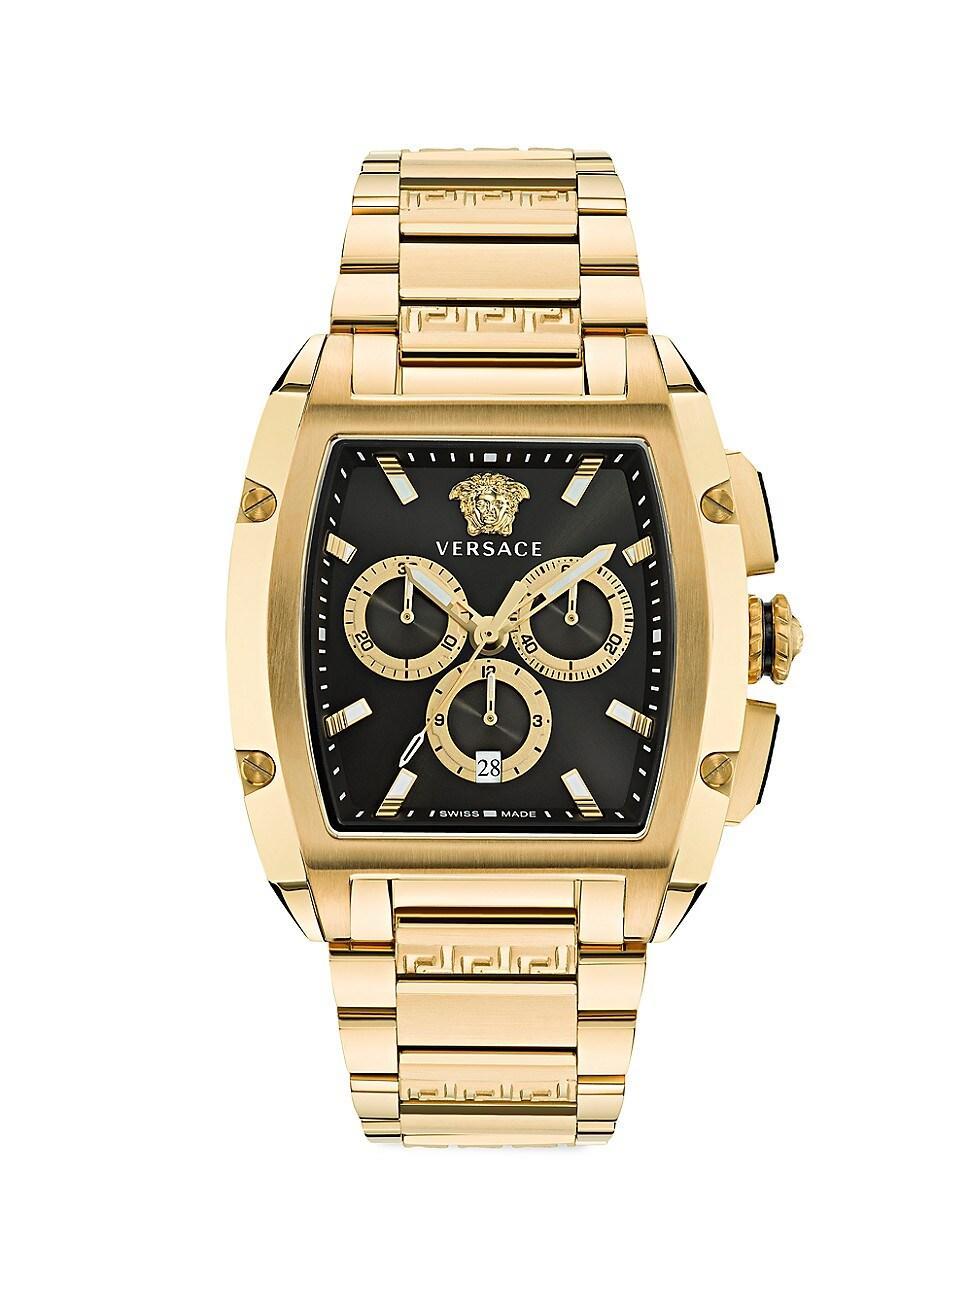 Versace Dominus Chronograph Silicone Strap Watch, 42mm Product Image